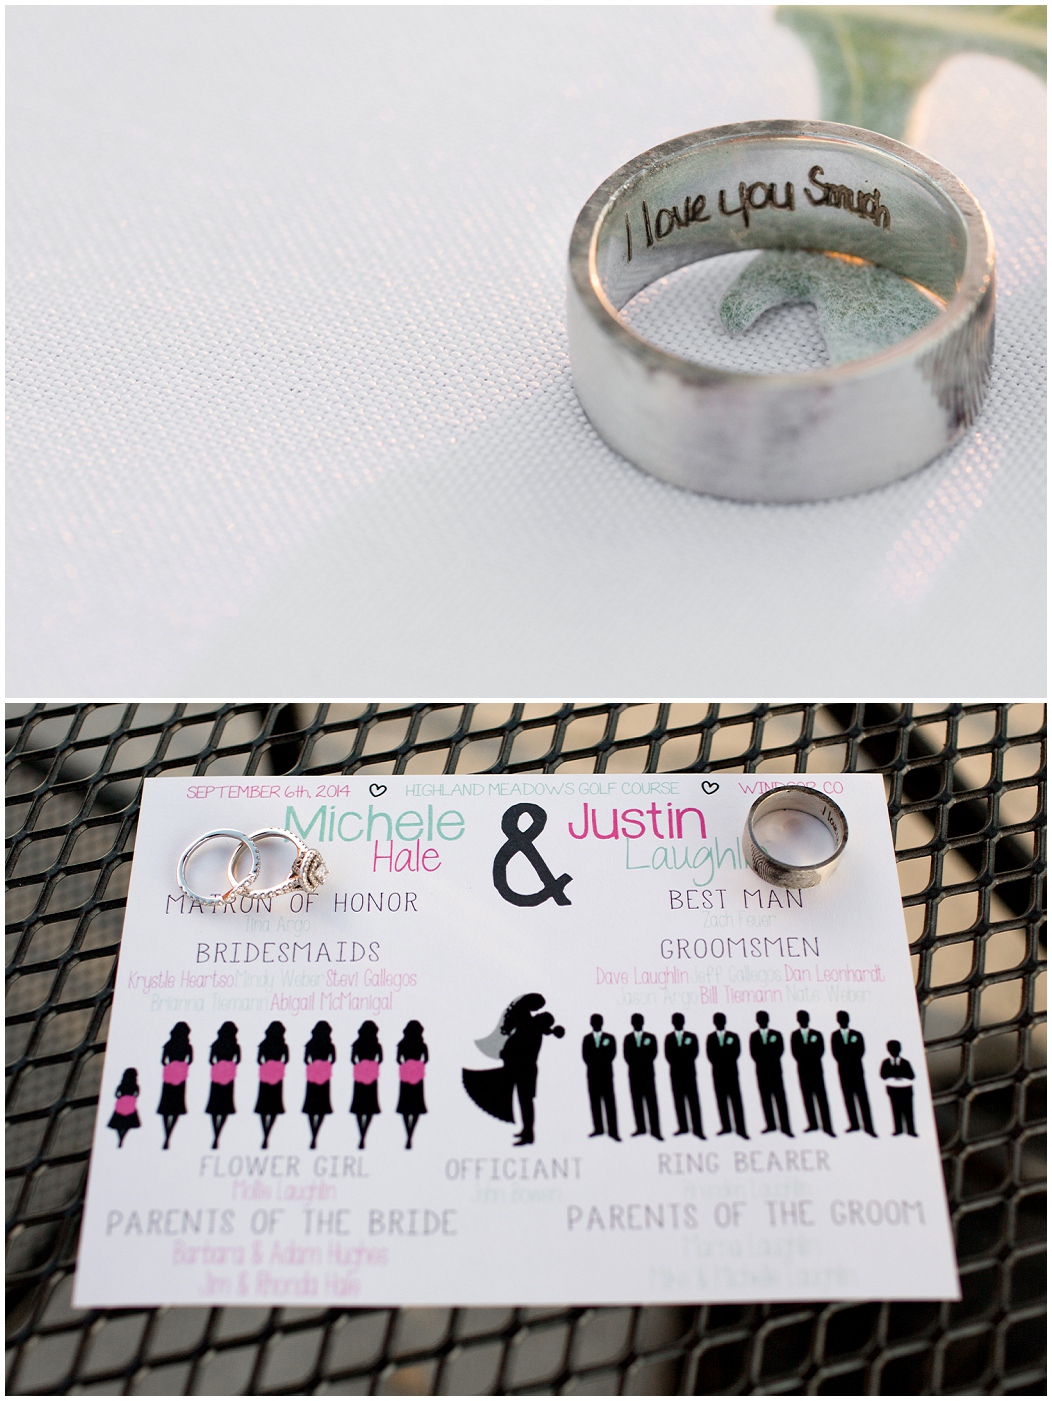 picture of wedding rings